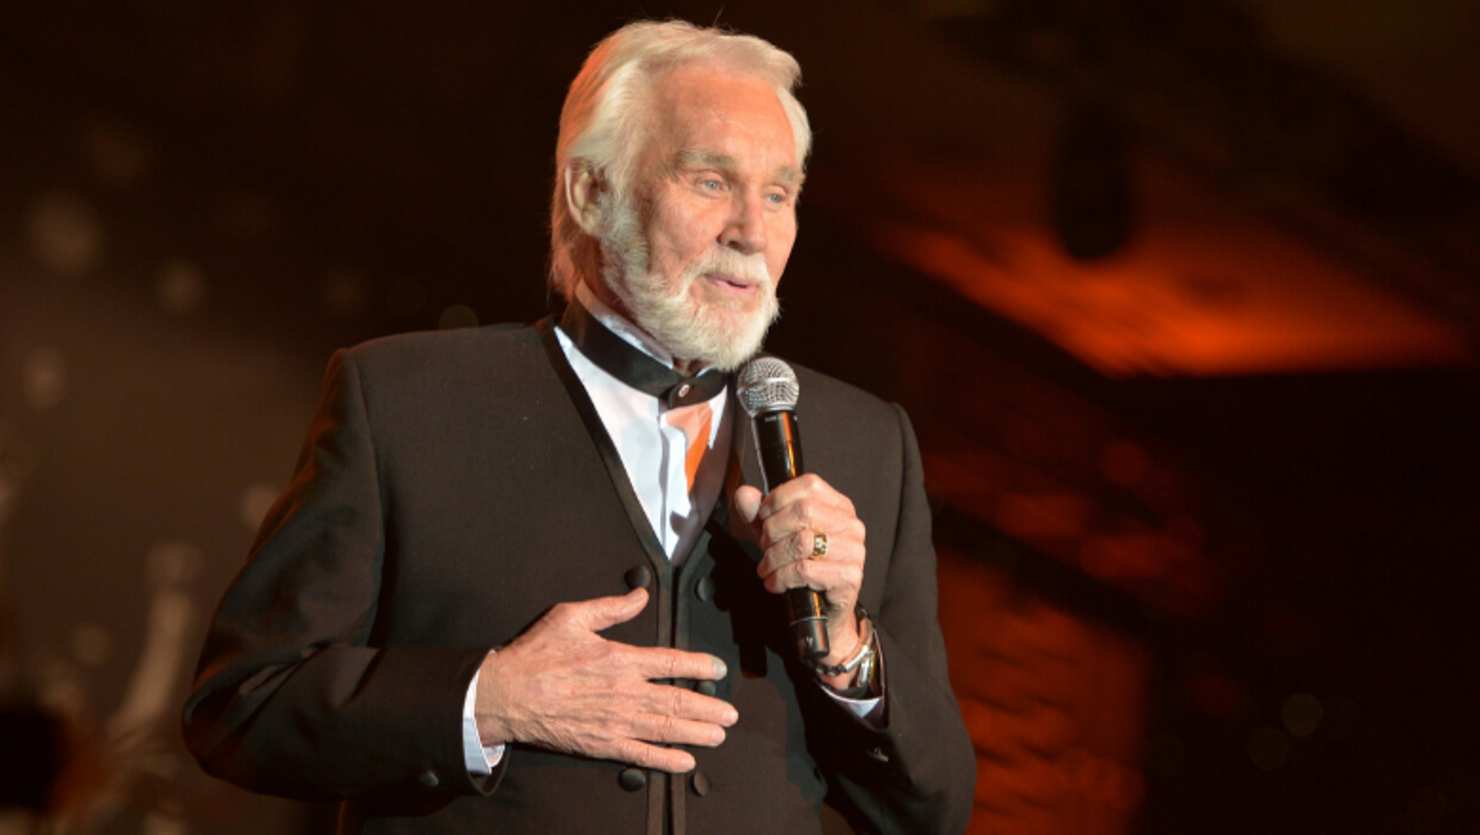 Kenny Rogers' Family Asks That Donations Be Made To COVID-19 Relief Fund